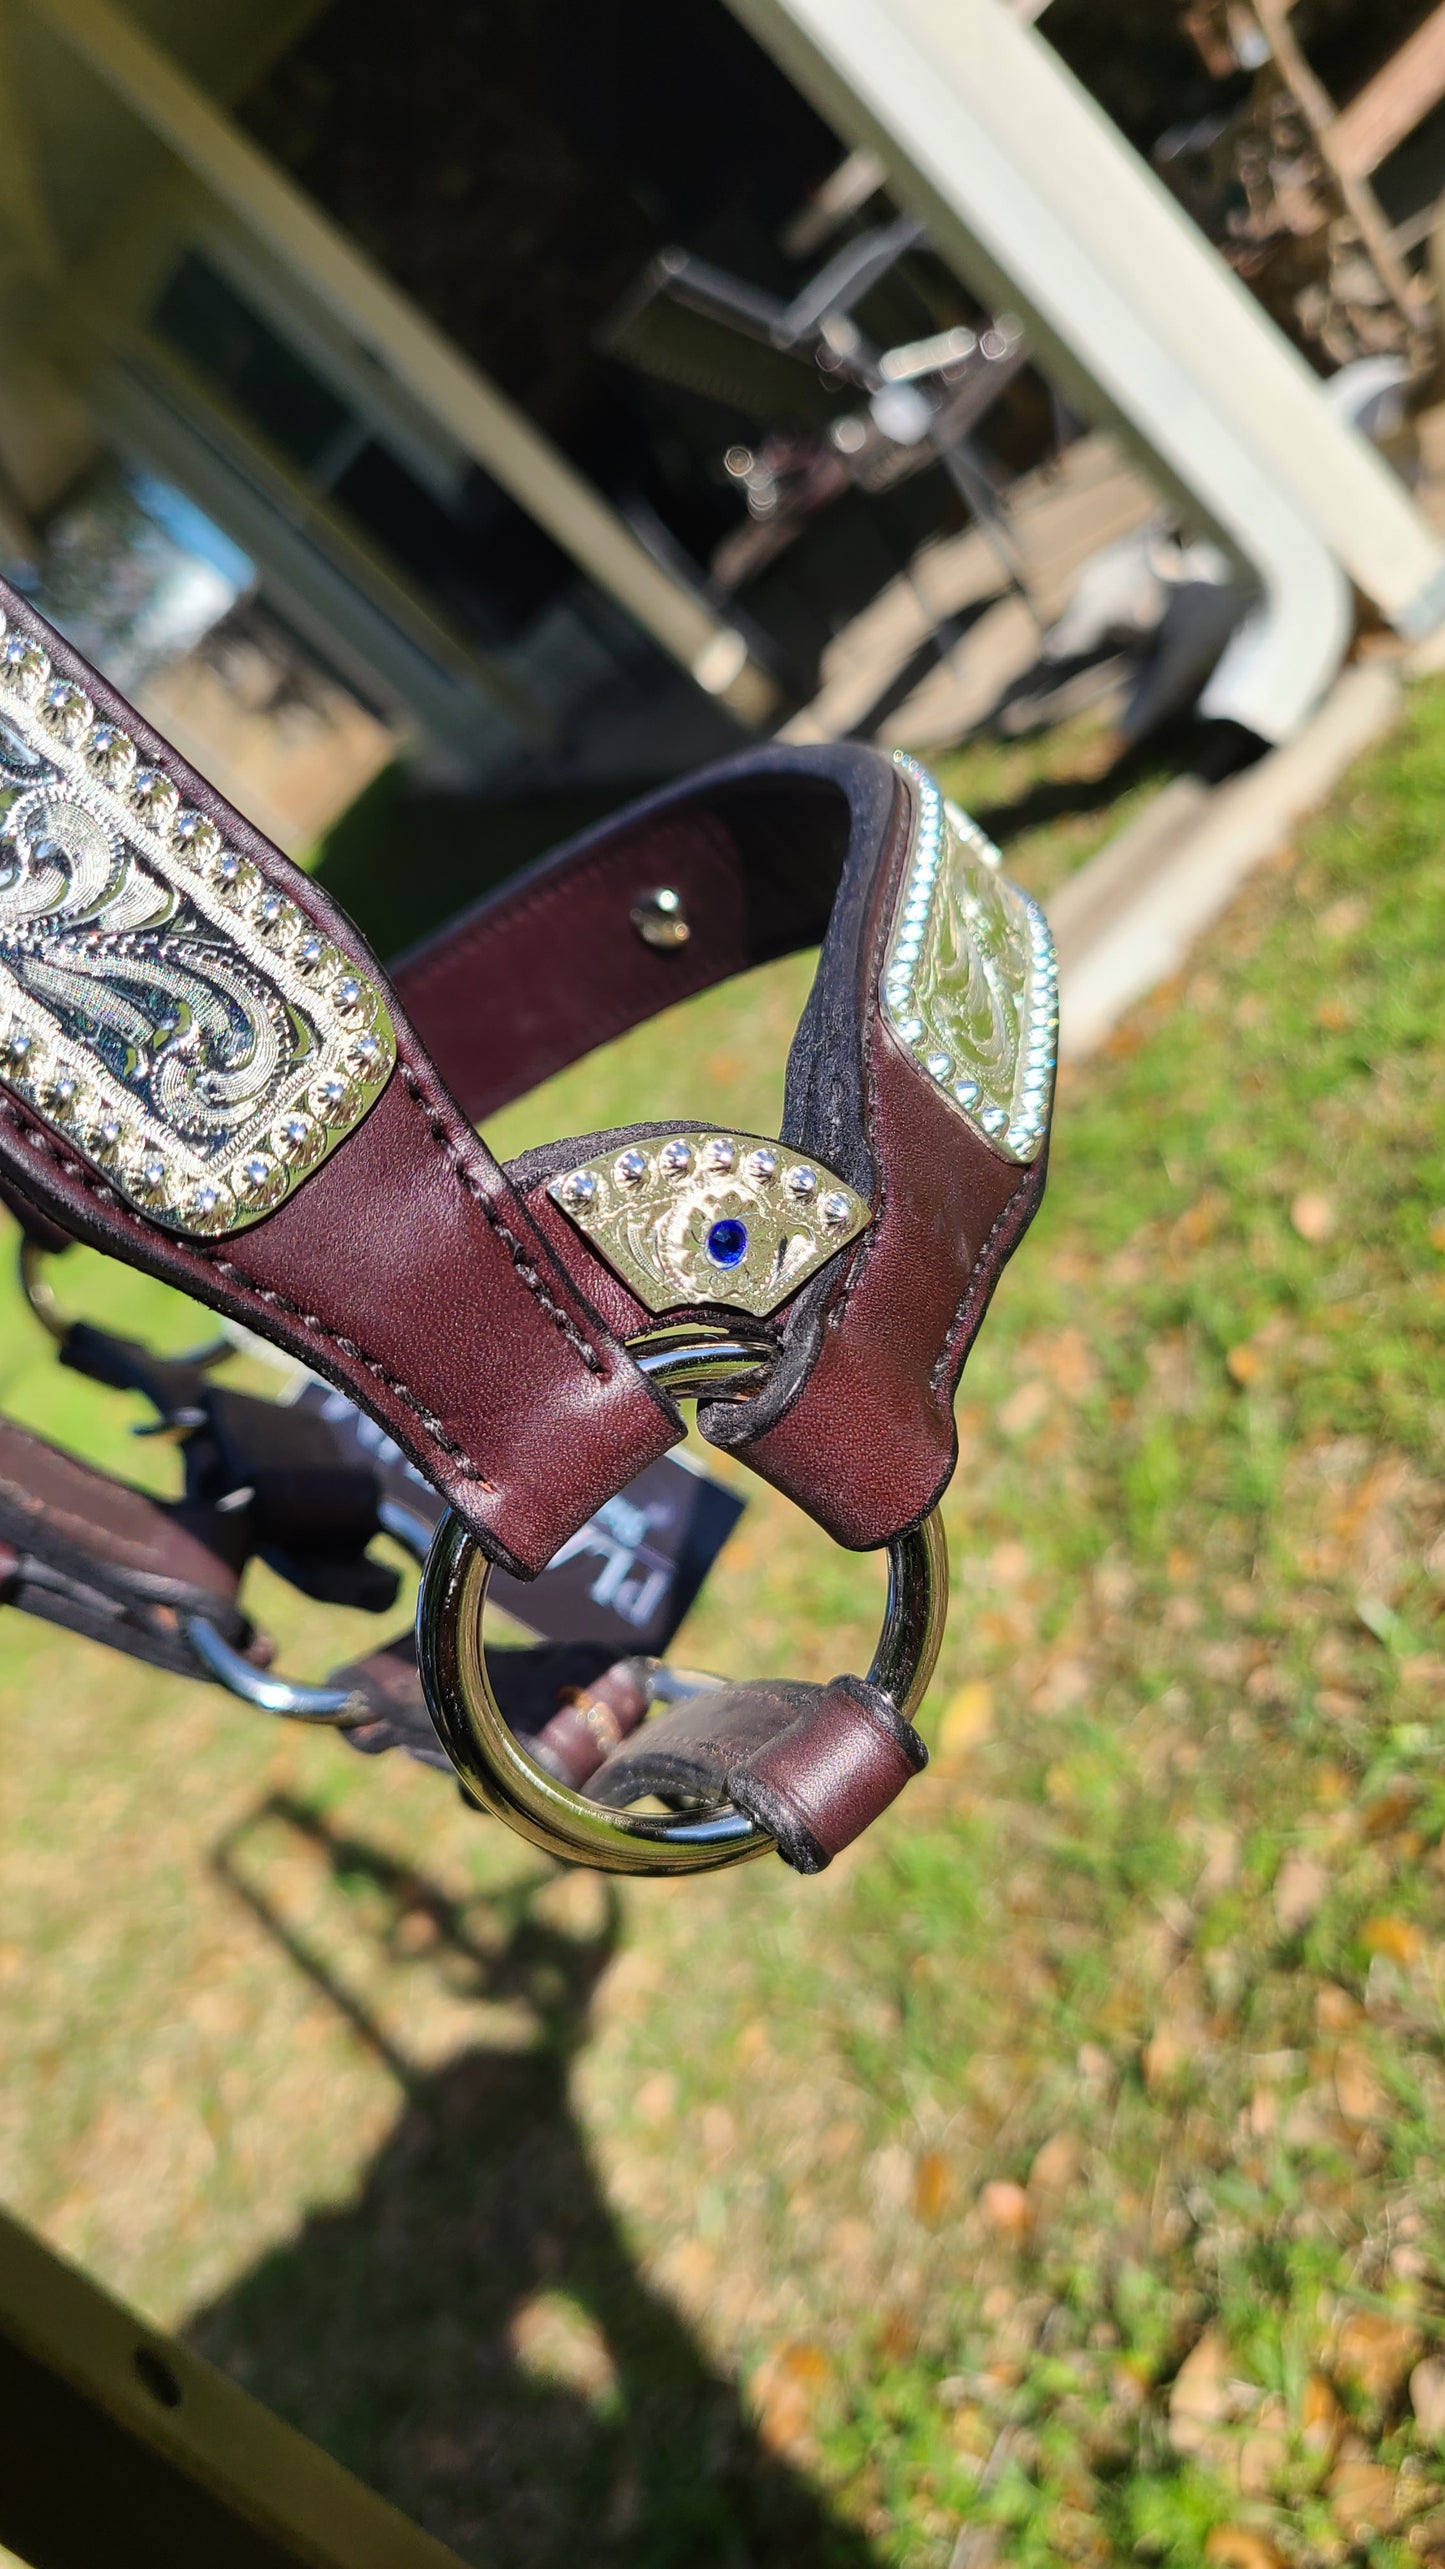 Horse Sized Show Halter with blue stones